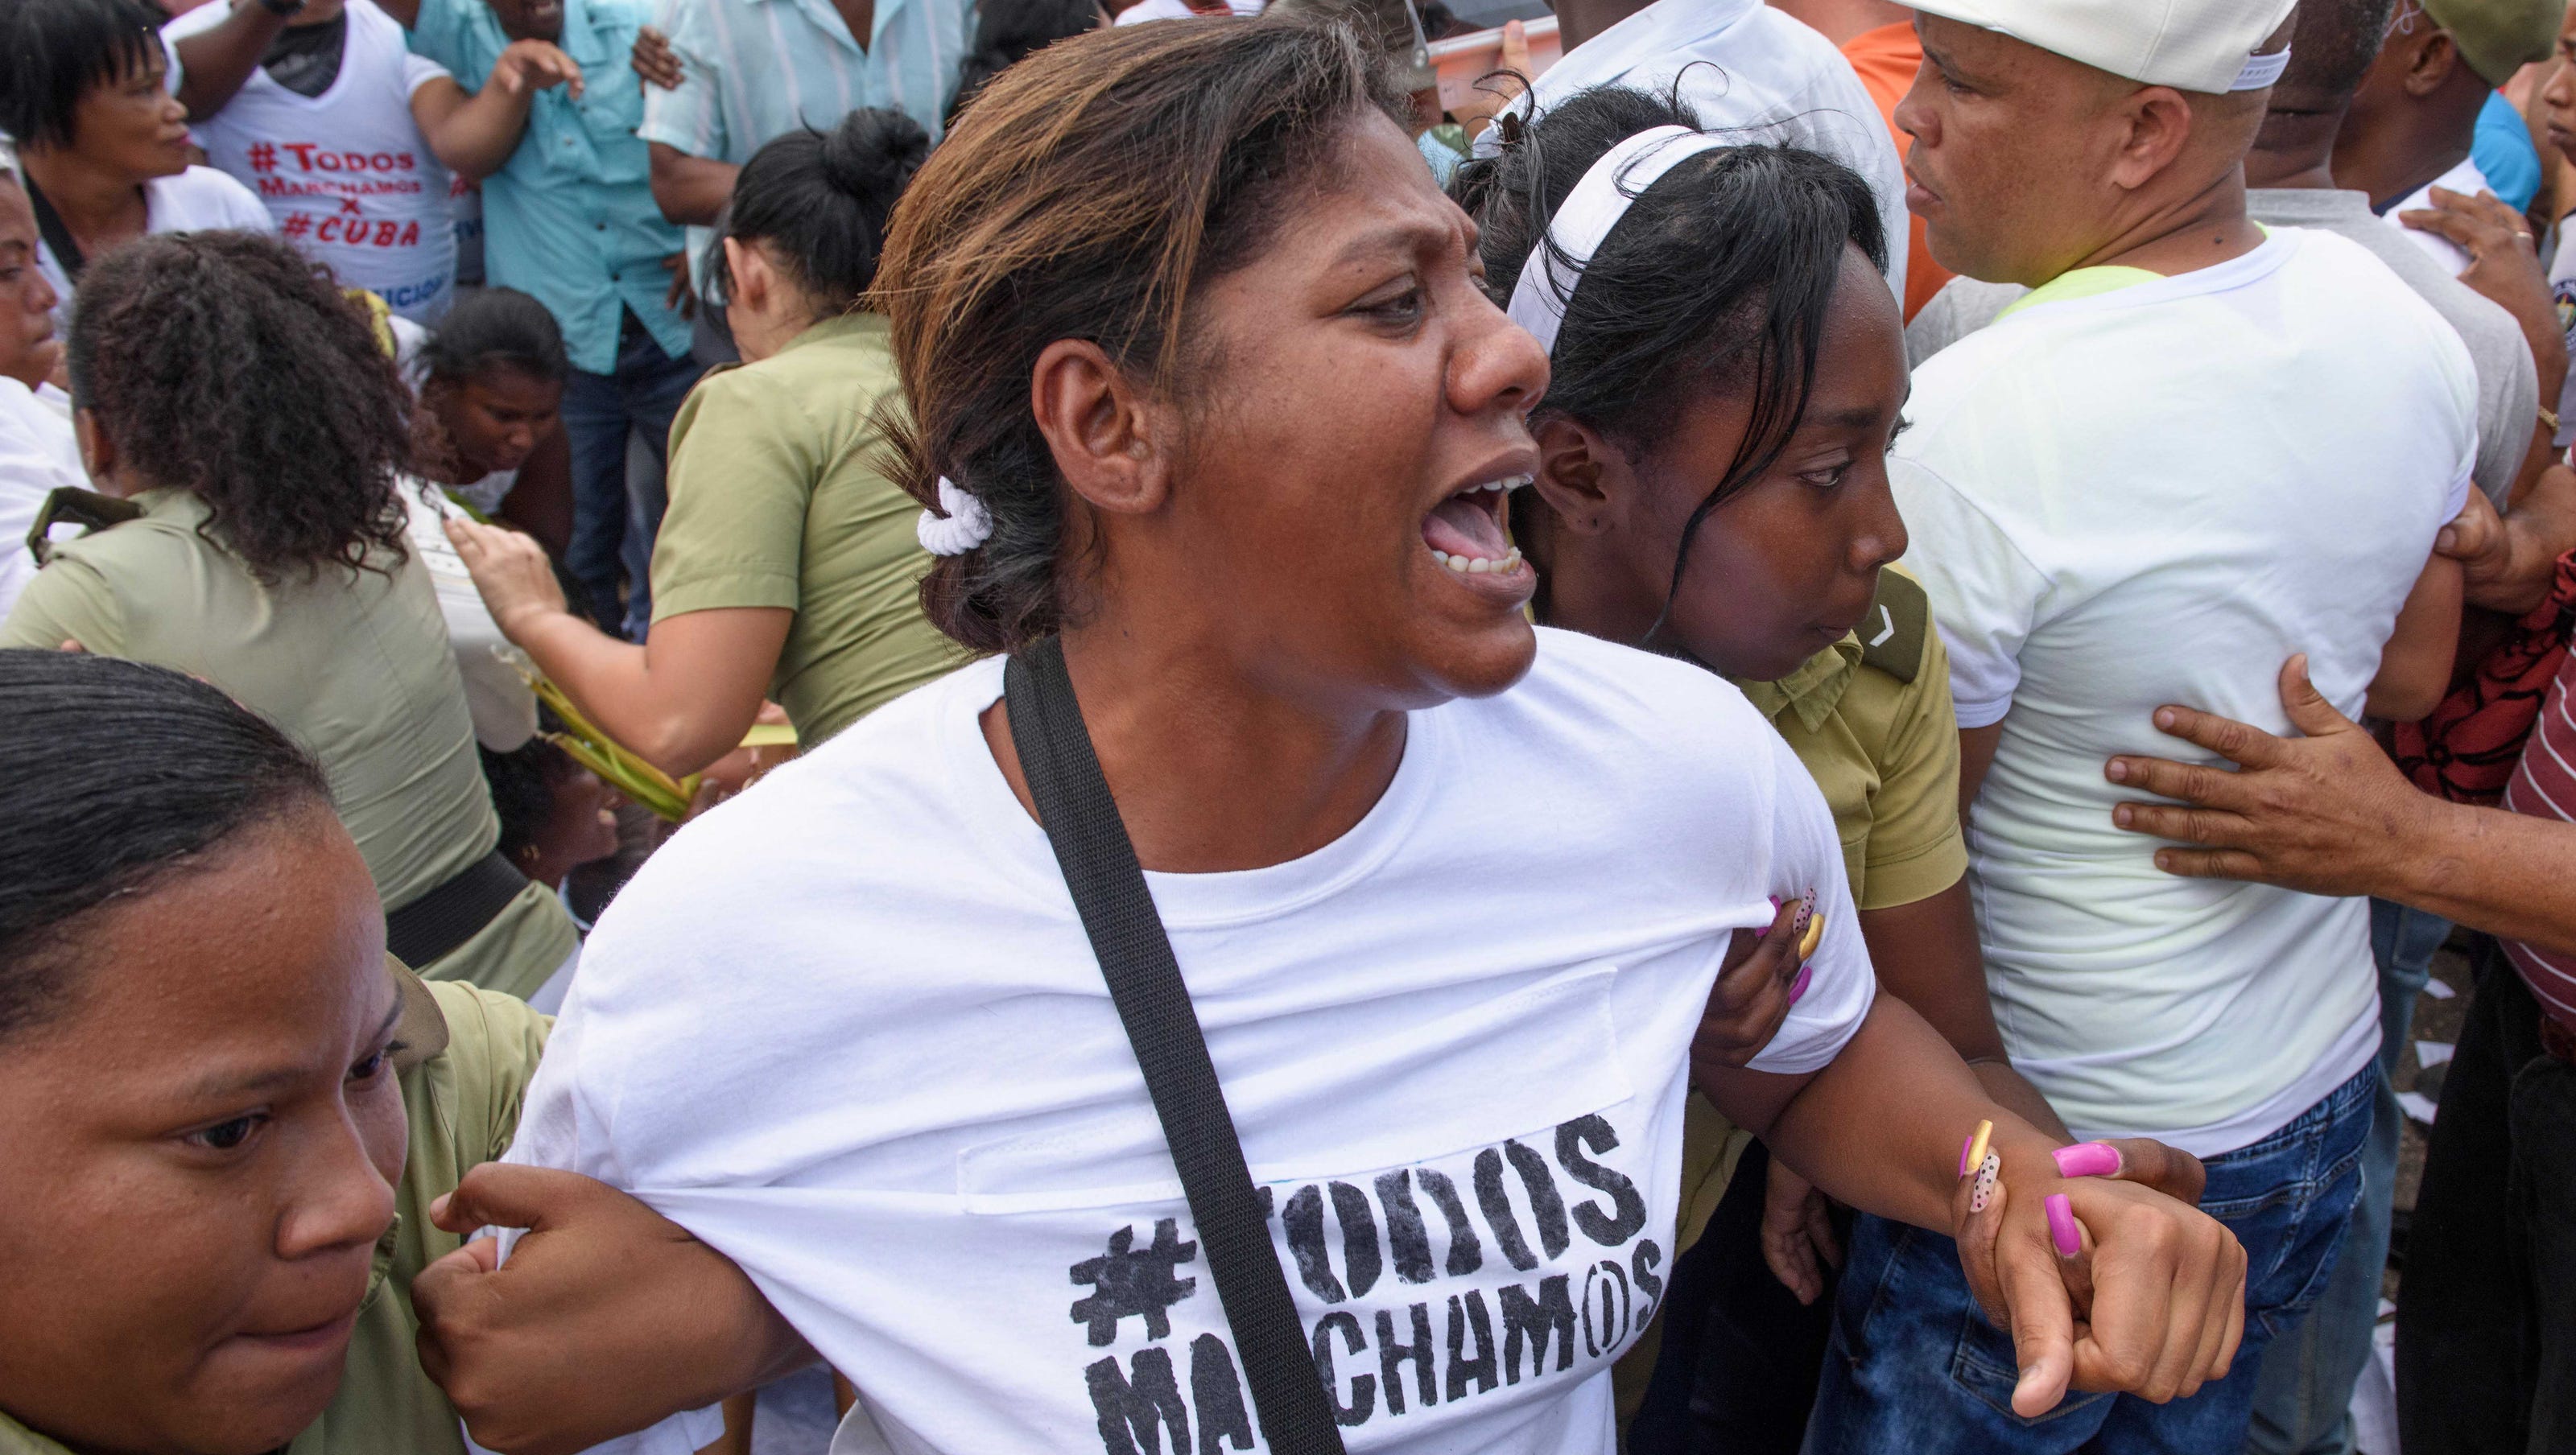 Cuba arrests dozens of human rights protesters before Obama's arrival